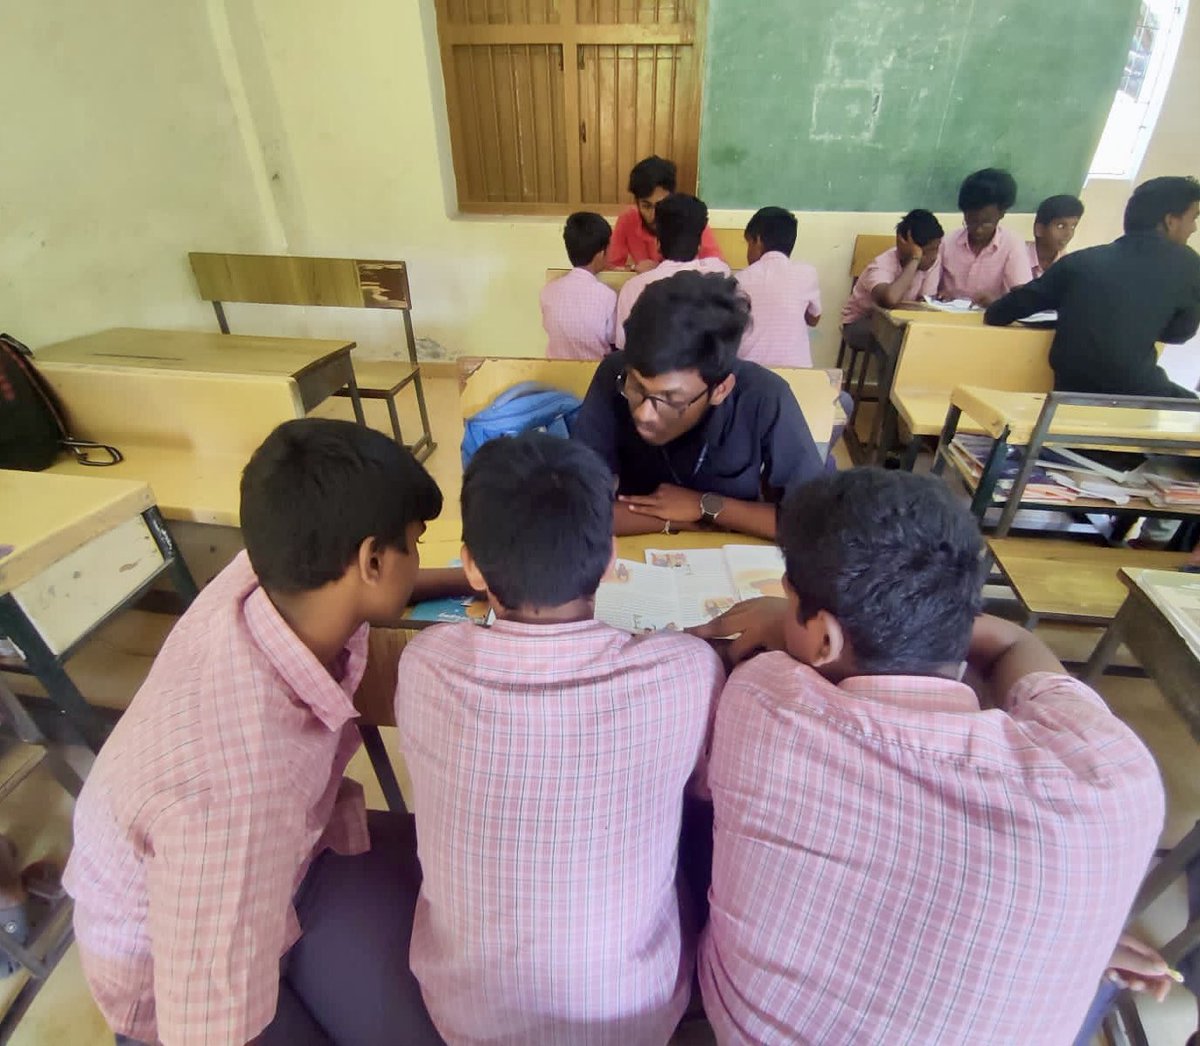 Volunteering helps develop empathetic leadership commn skills that create an inclusive society. A fulfilling experience leads to belief in the power of volunteering. #chennaivolunteers teach #conversationalenglish as part of SPARKLE, a long-term intervention 4 schl students.